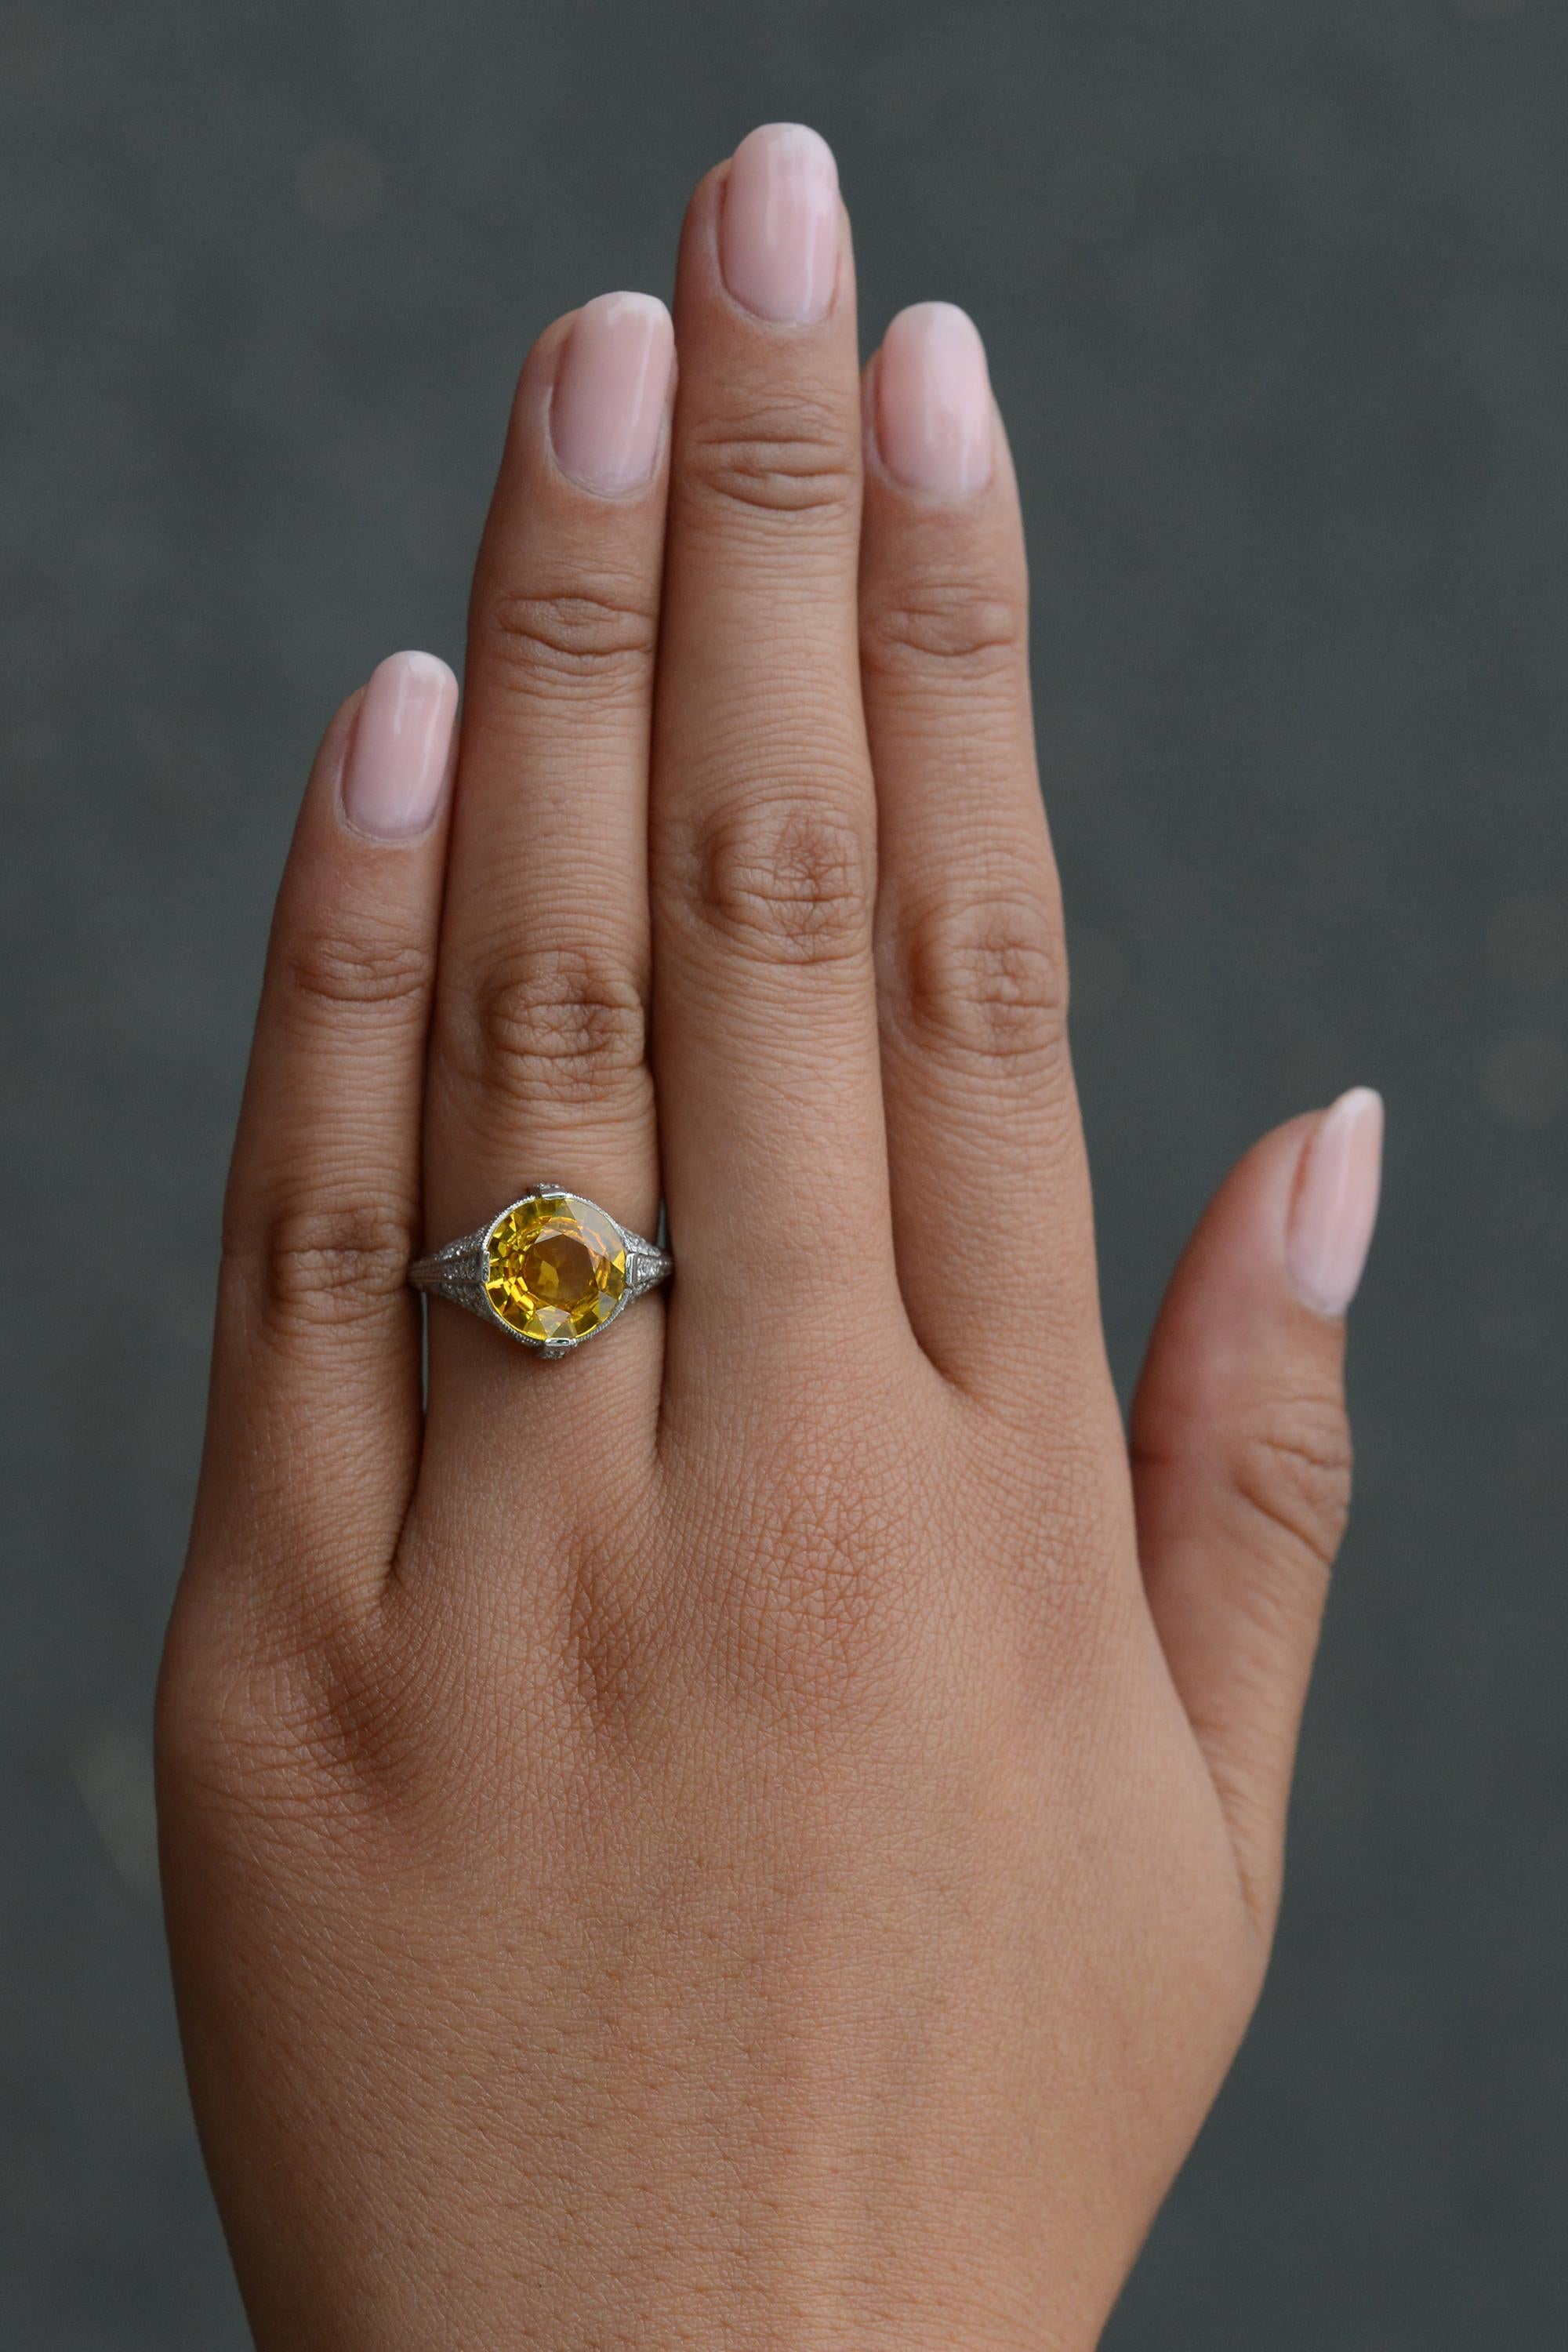 This vibrant ring surely adds a drop of sunshine to your hand! Centered on a vivid, 4 carat flaming yellow sapphire which makes for an incredibly striking gemstone engagement ring. The setting is an authentic 1920s Jazz Age Art Deco masterpiece